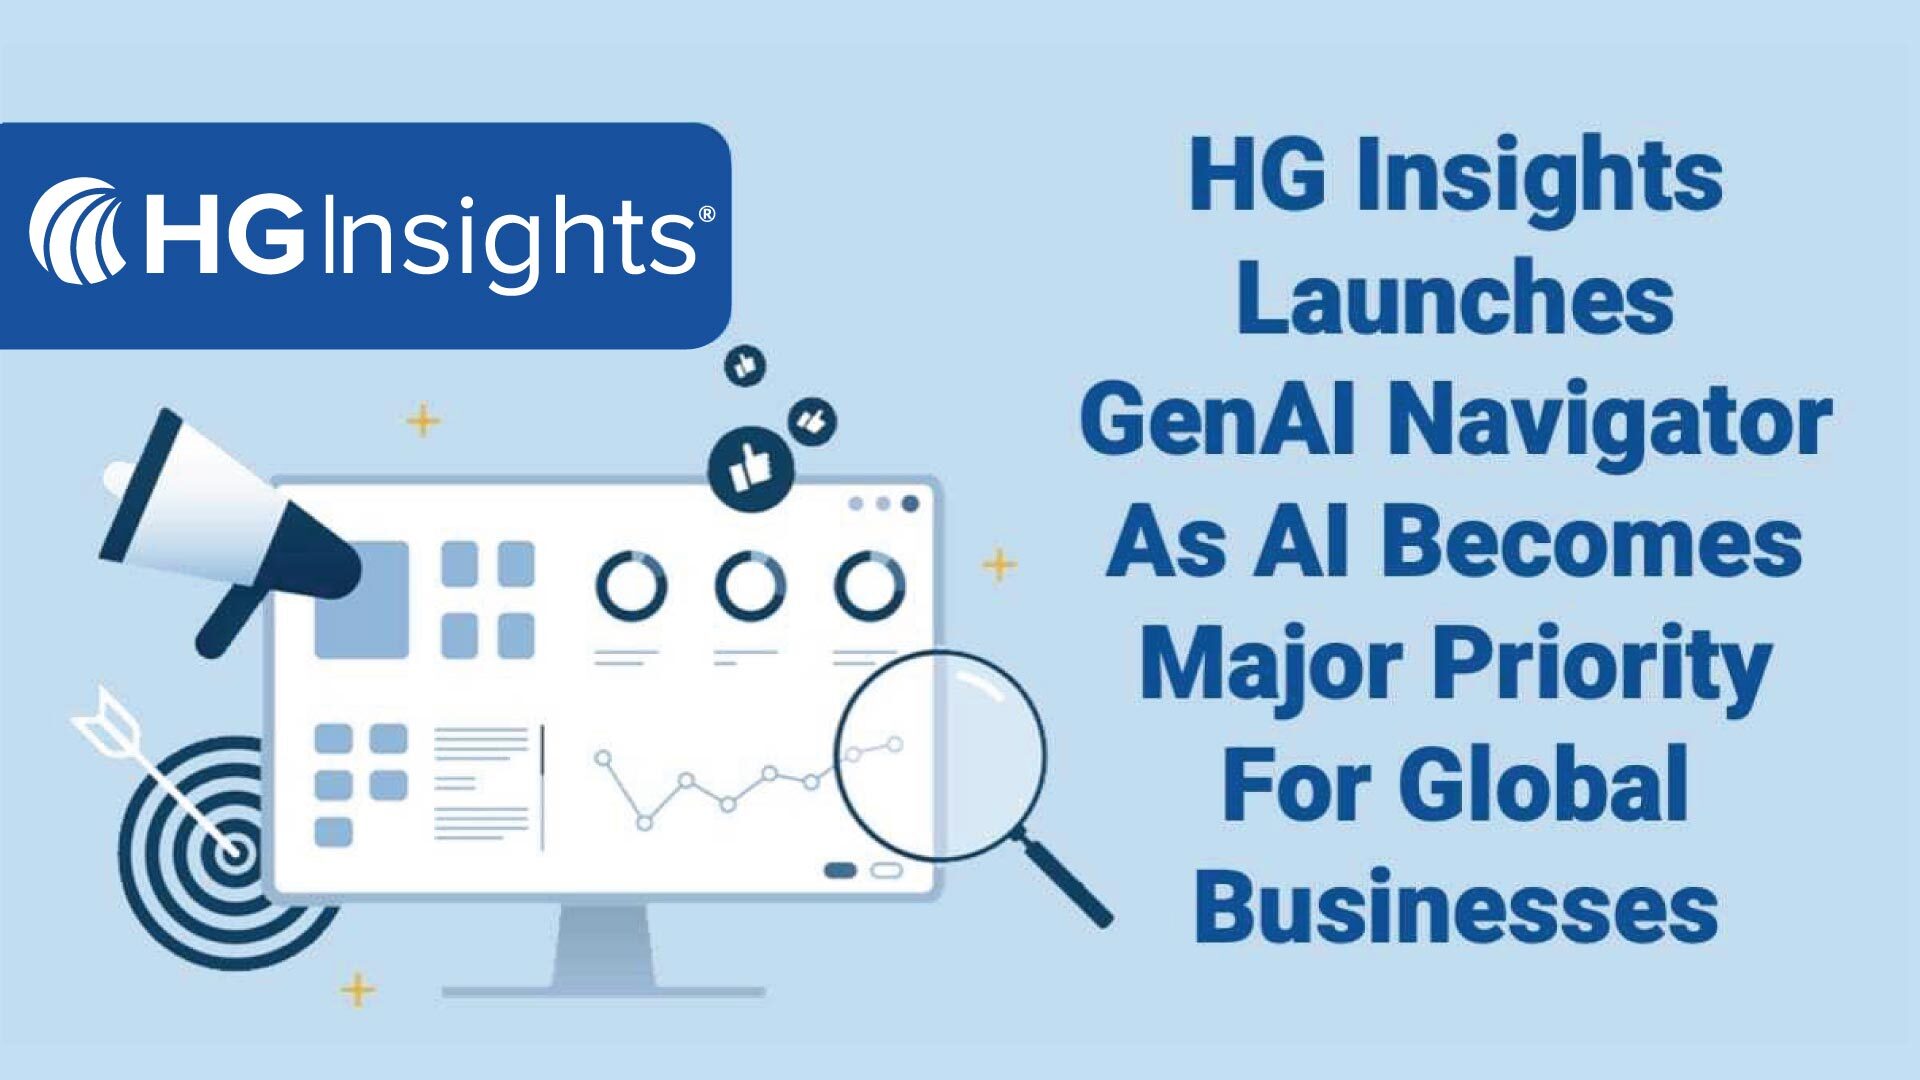 HG Insights Launches GenAI Navigator As AI Becomes Major Priority For Global Businesses